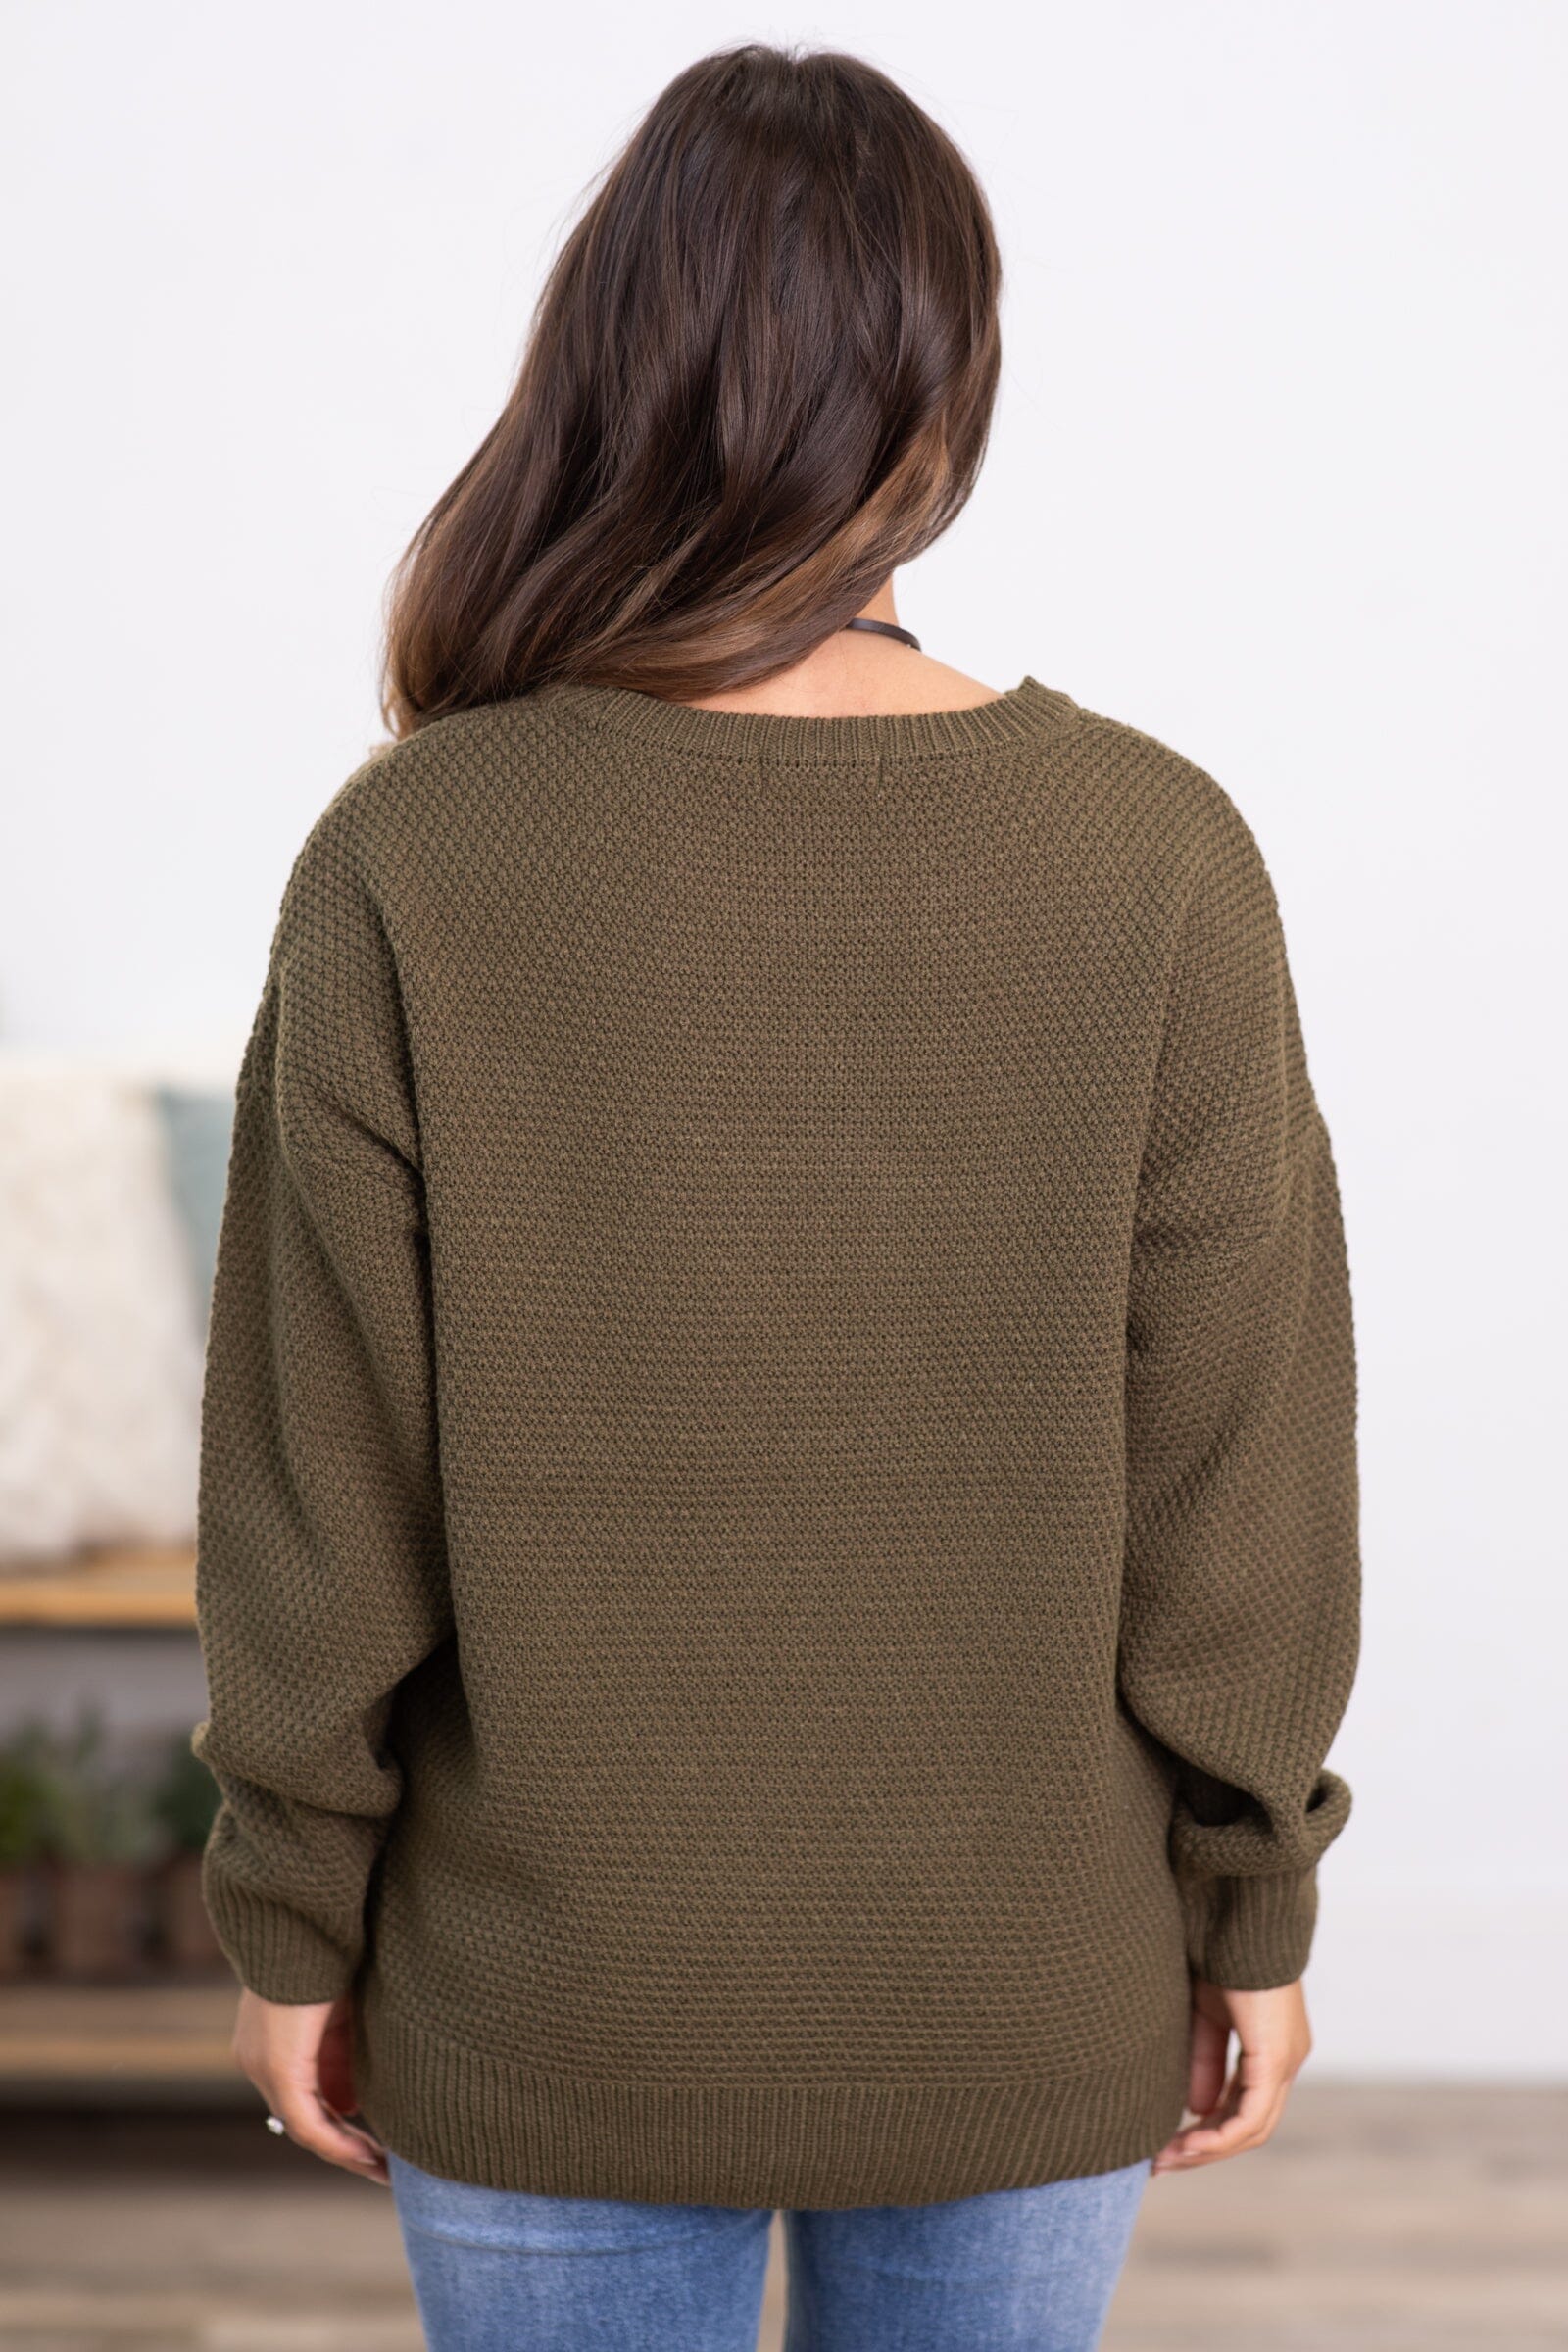 Olive Ribbed Trim Round Neck Basic Sweater - Filly Flair